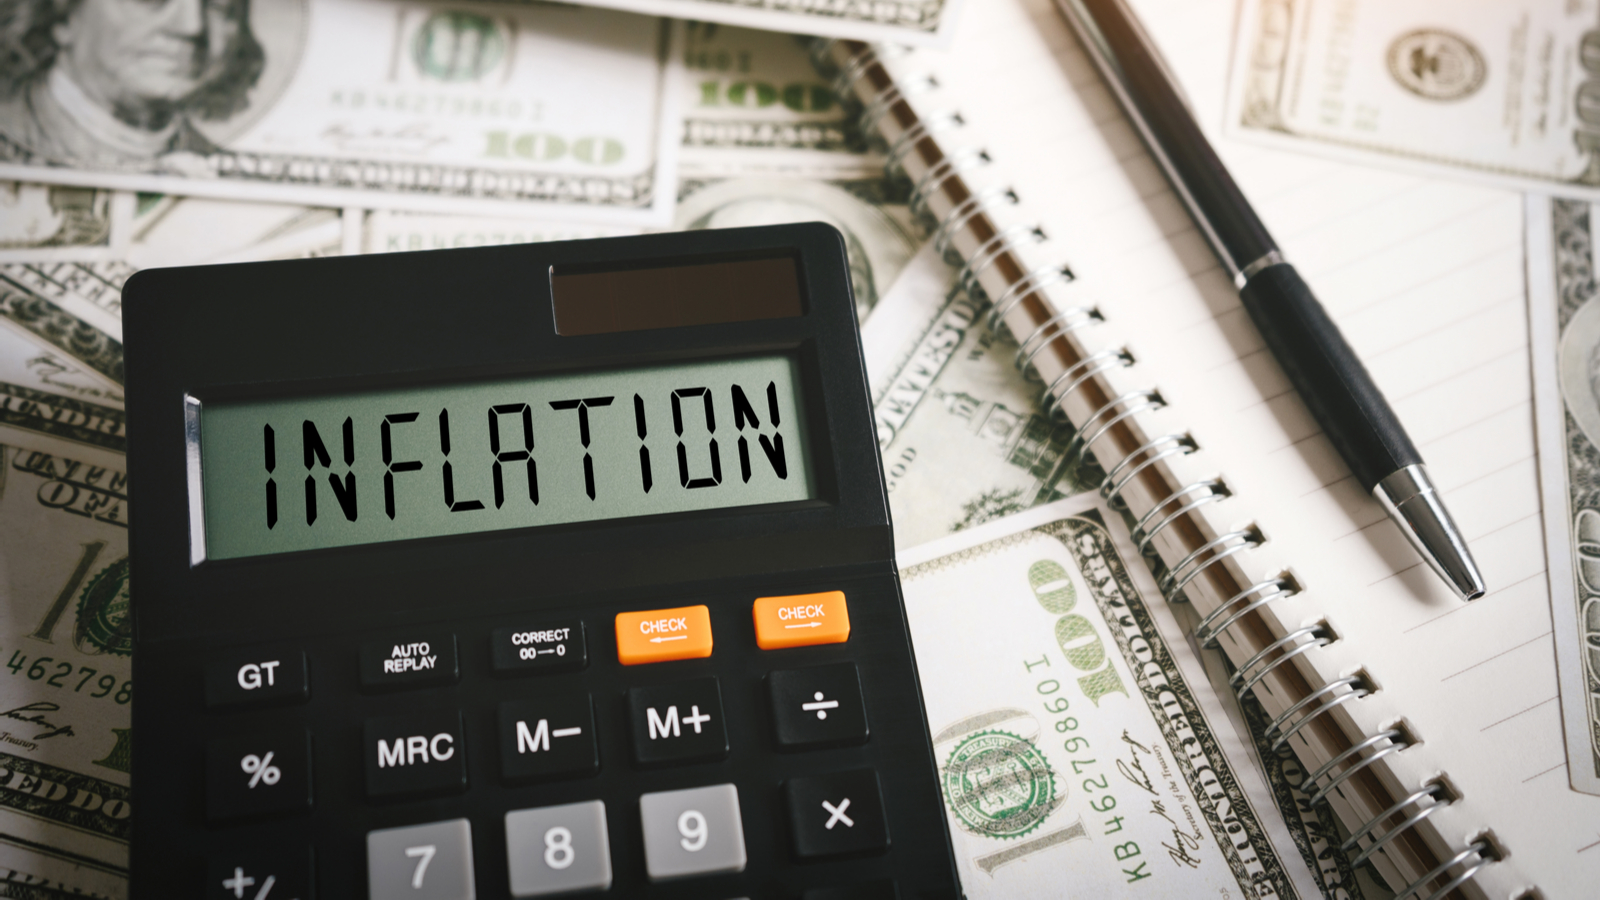 "Inflation" written on calculator with money in the background. Inflation